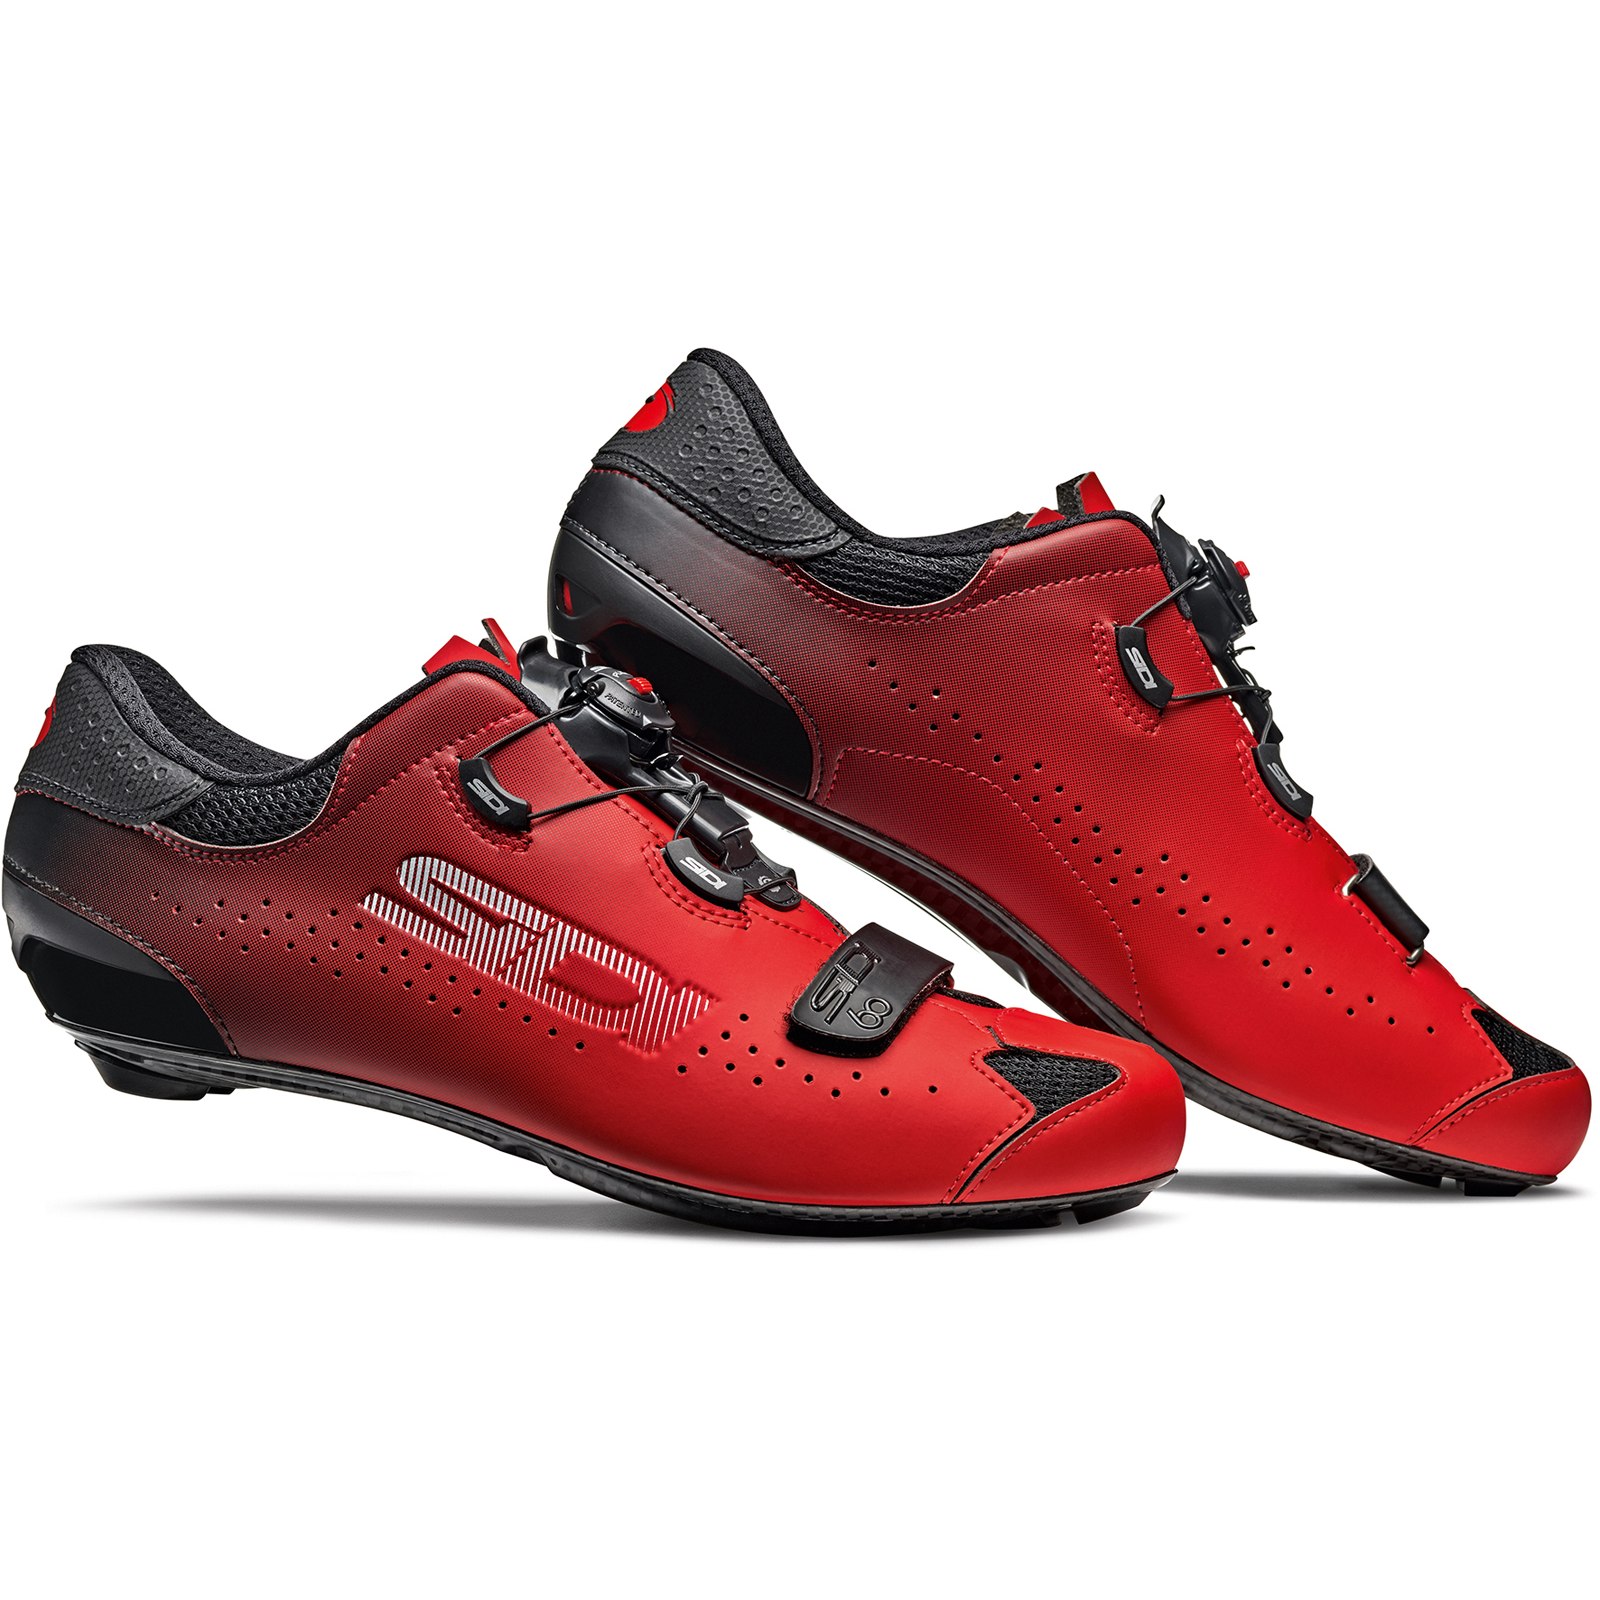 Picture of Sidi Sixty Road Shoe - black/red